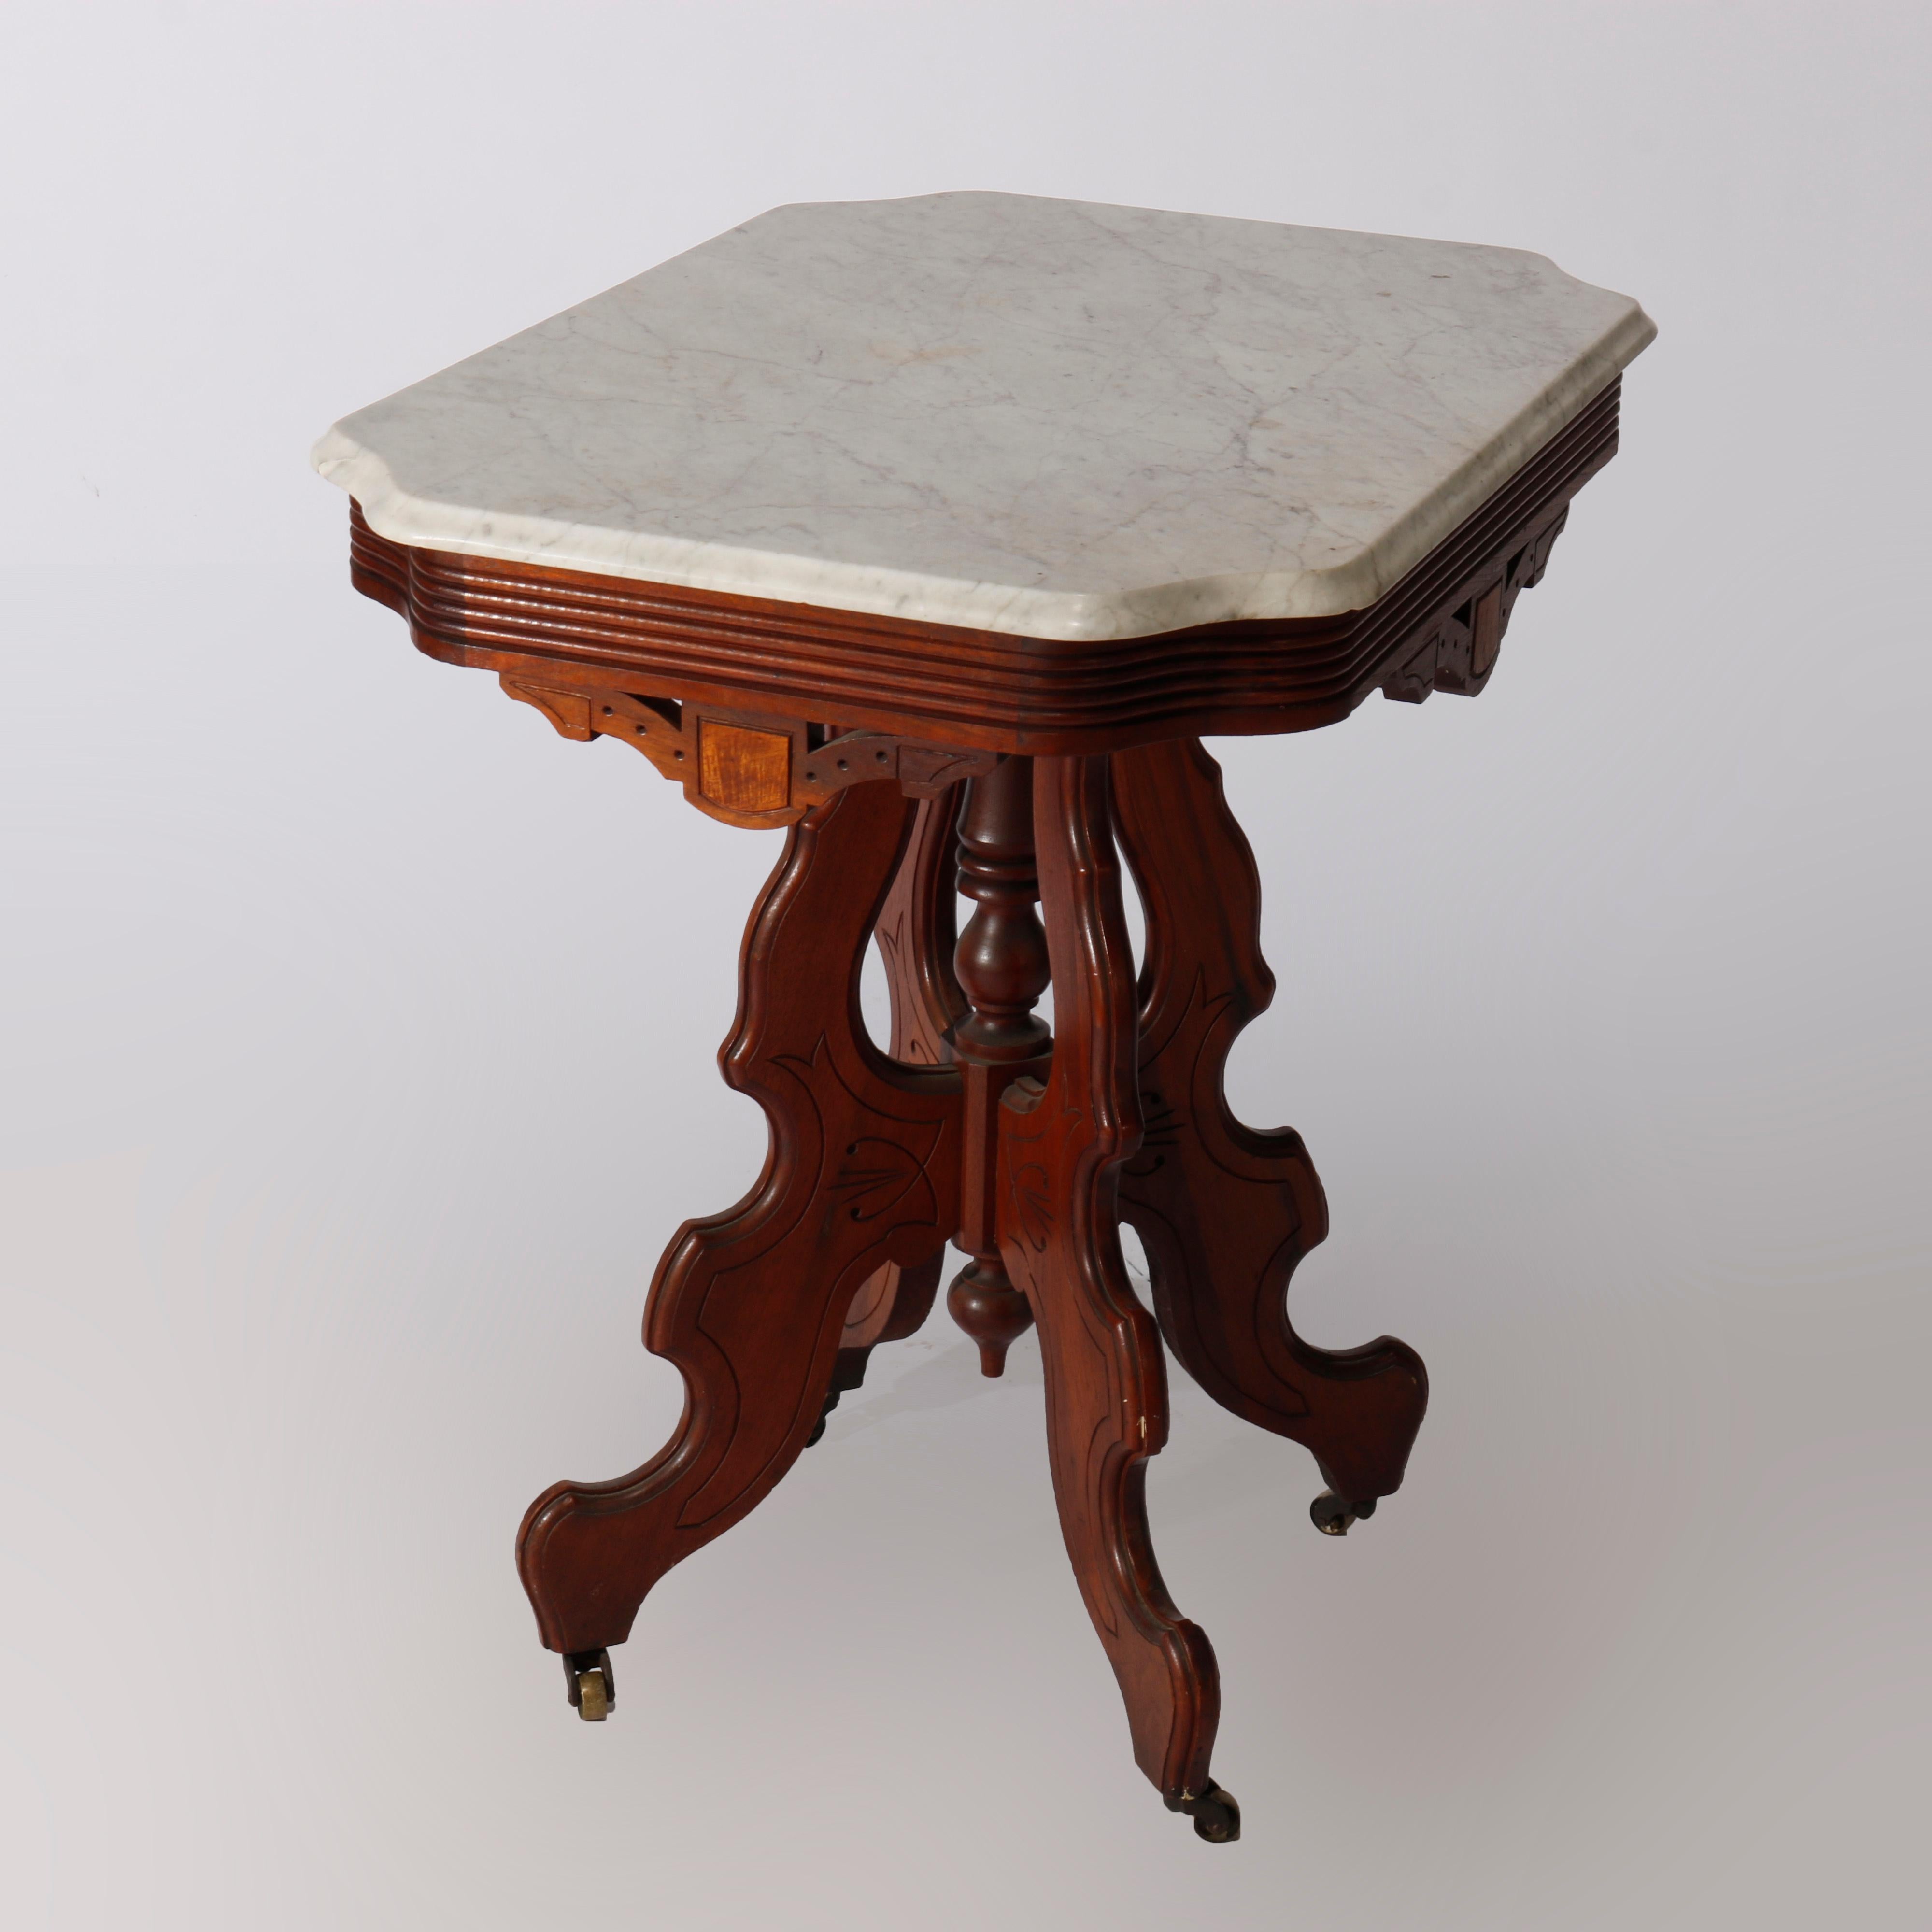 An antique Eastlake parlor table offers beveled and stylized clip corner marble top over carved walnut base having burl insets, raised on stylized scroll from legs with central turned column, incised decoration throughout, circa 1890

Measures -